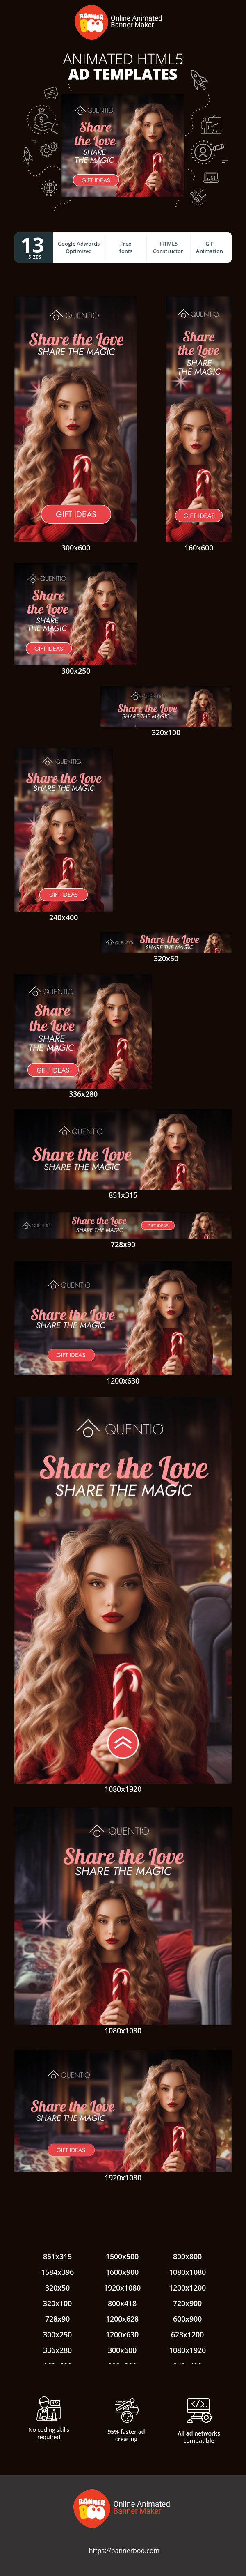 Banner ad template — Share The Love Share The Magic — Christmas